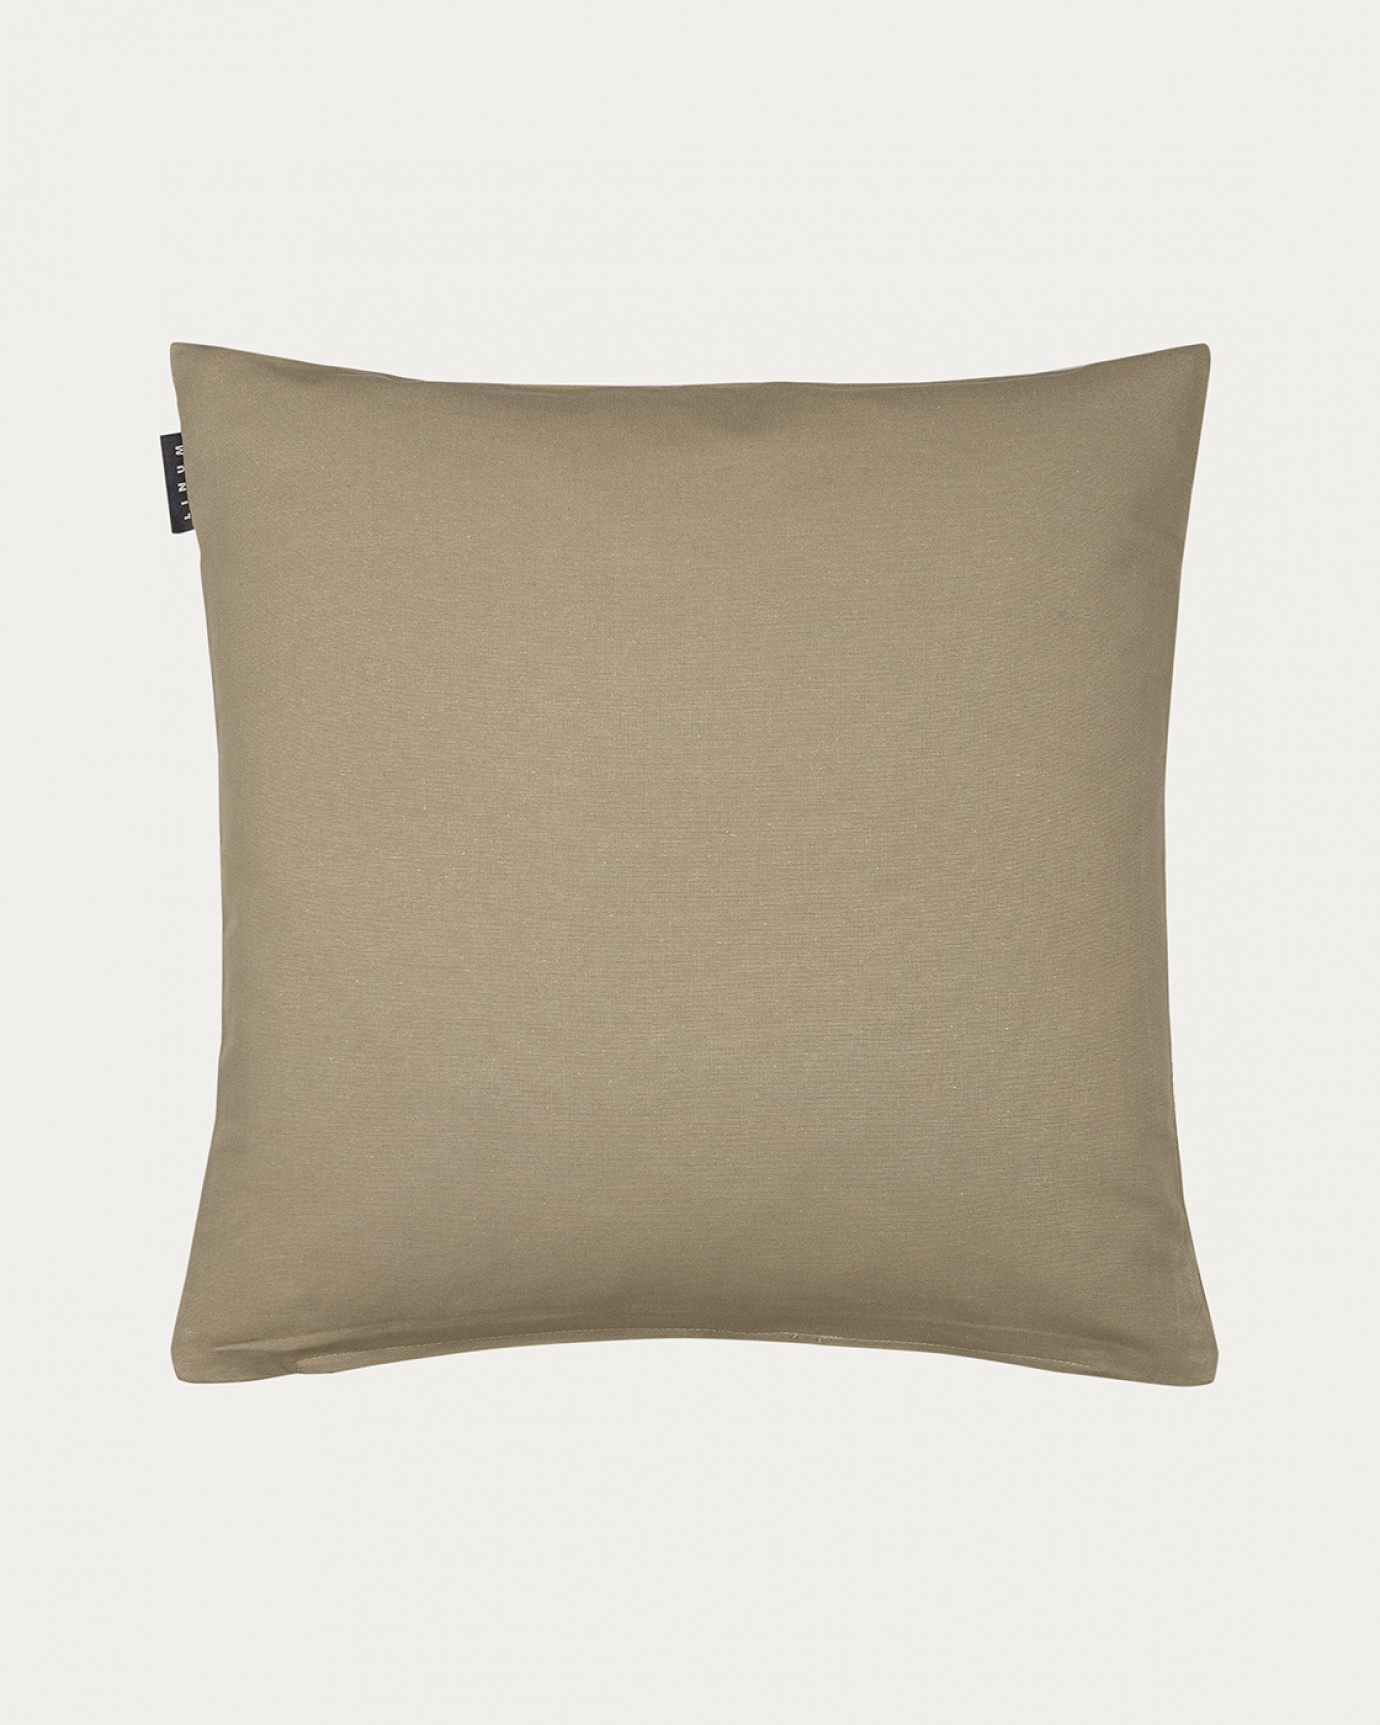 Product image light bear brown ANNABELL cushion cover made of soft cotton from LINUM DESIGN. Size 50x50 cm.